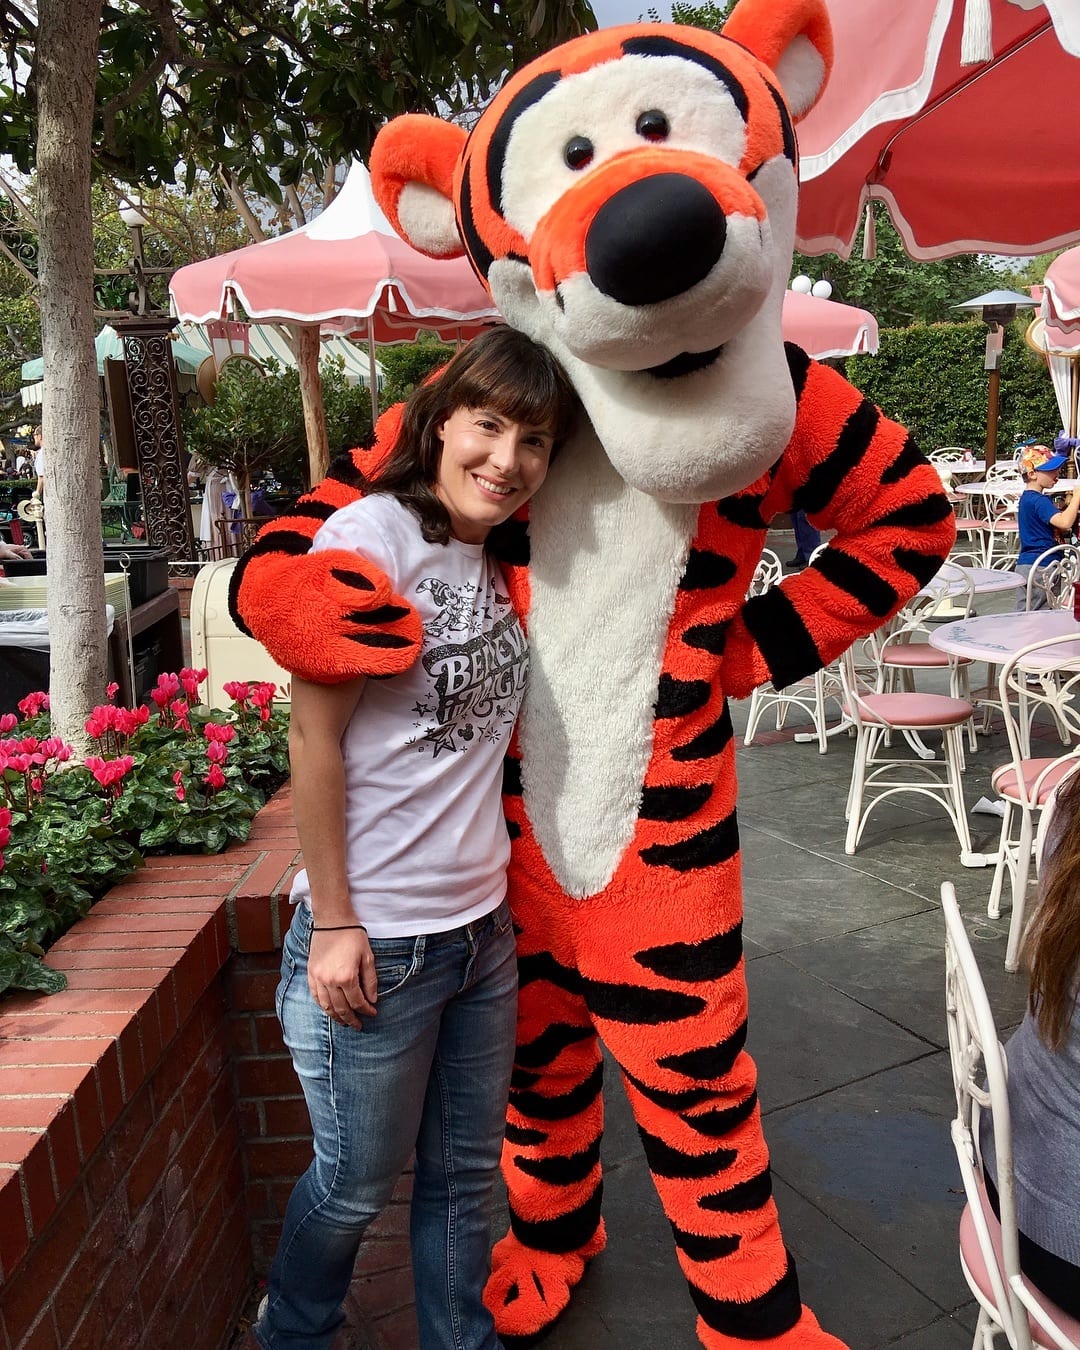 Tigger is energetic, optimistic, curious about life, enthusiastic and he has fun. Be more like…